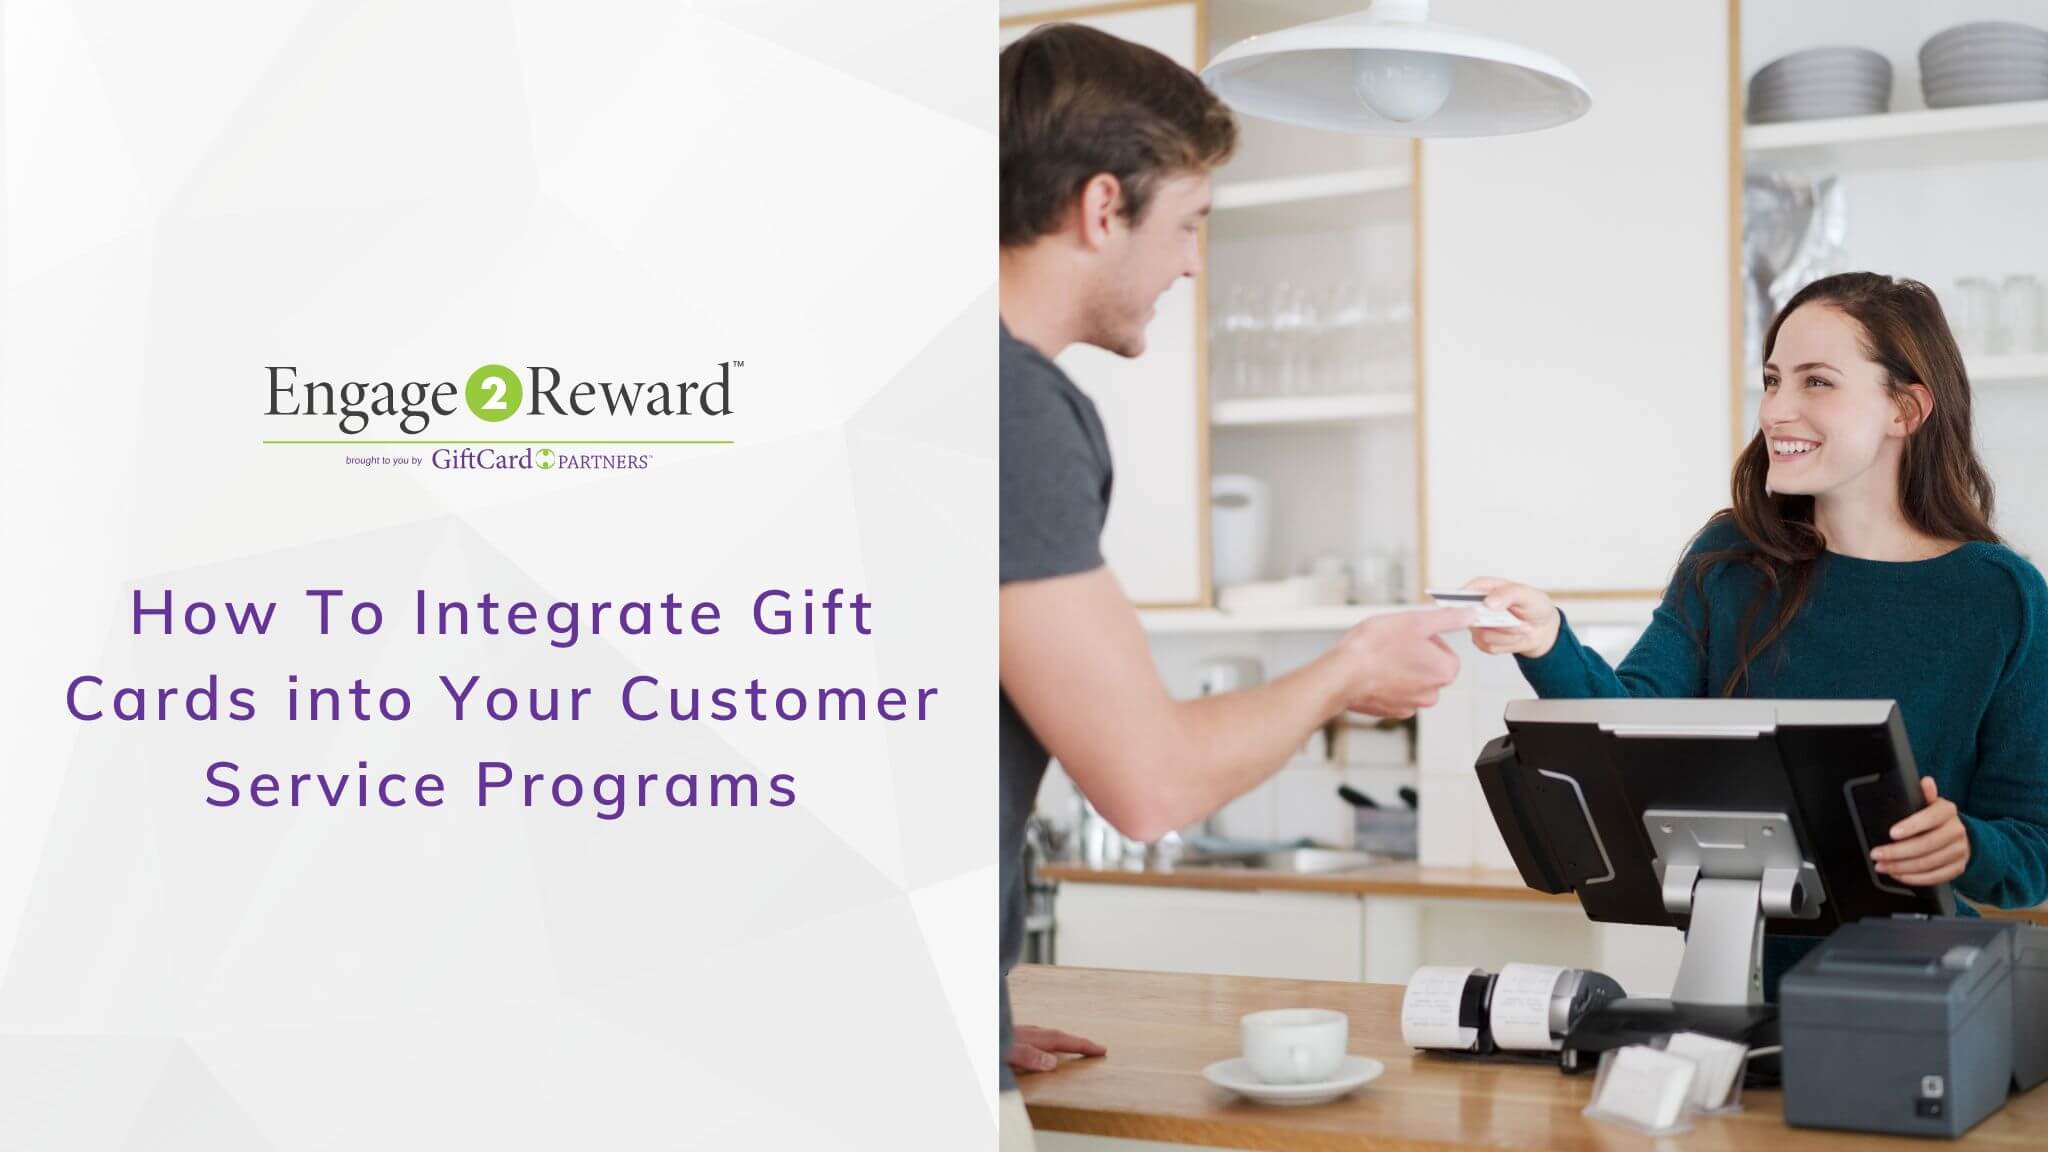 How To Integrate Gift Cards into Your Customer Service Programs